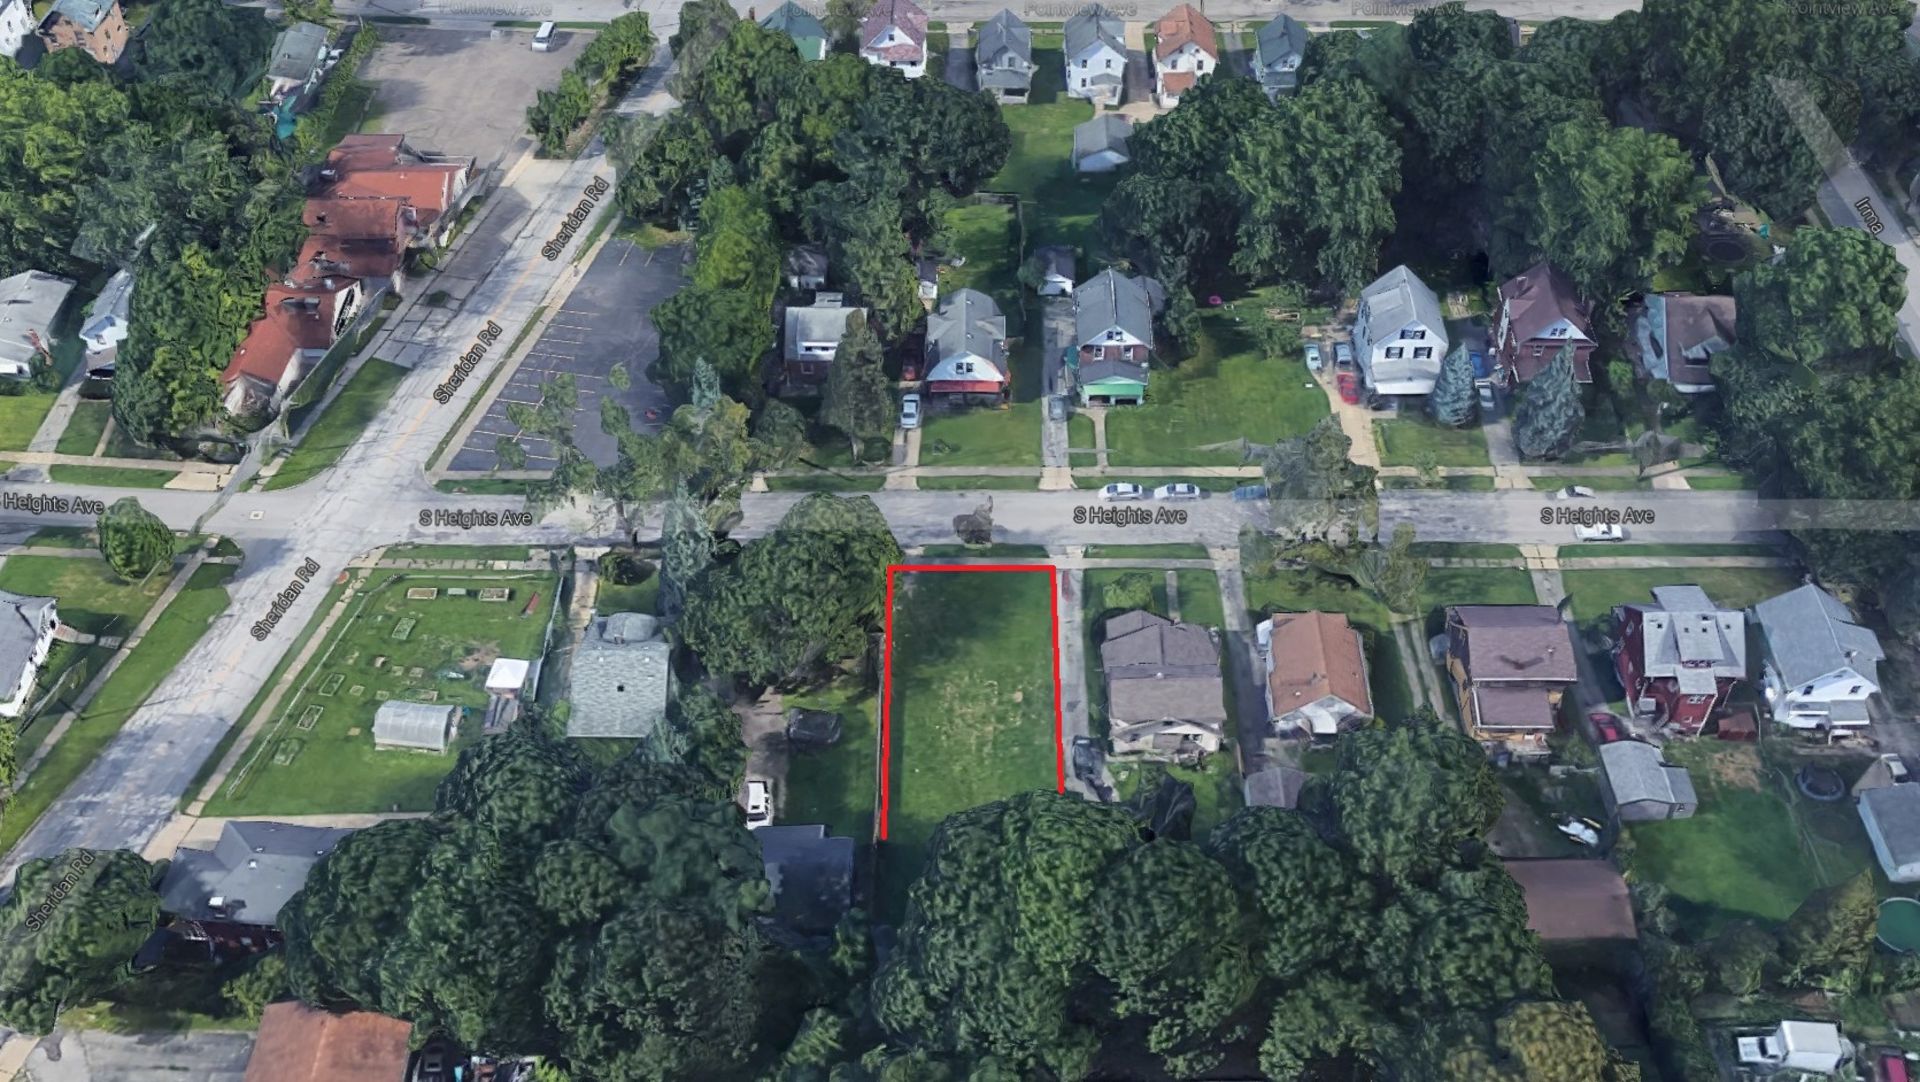 PLOT OF LAND AT 1921 S HEIGHTS AVENUE, YOUNGSTOWN, OHIO - Image 2 of 8